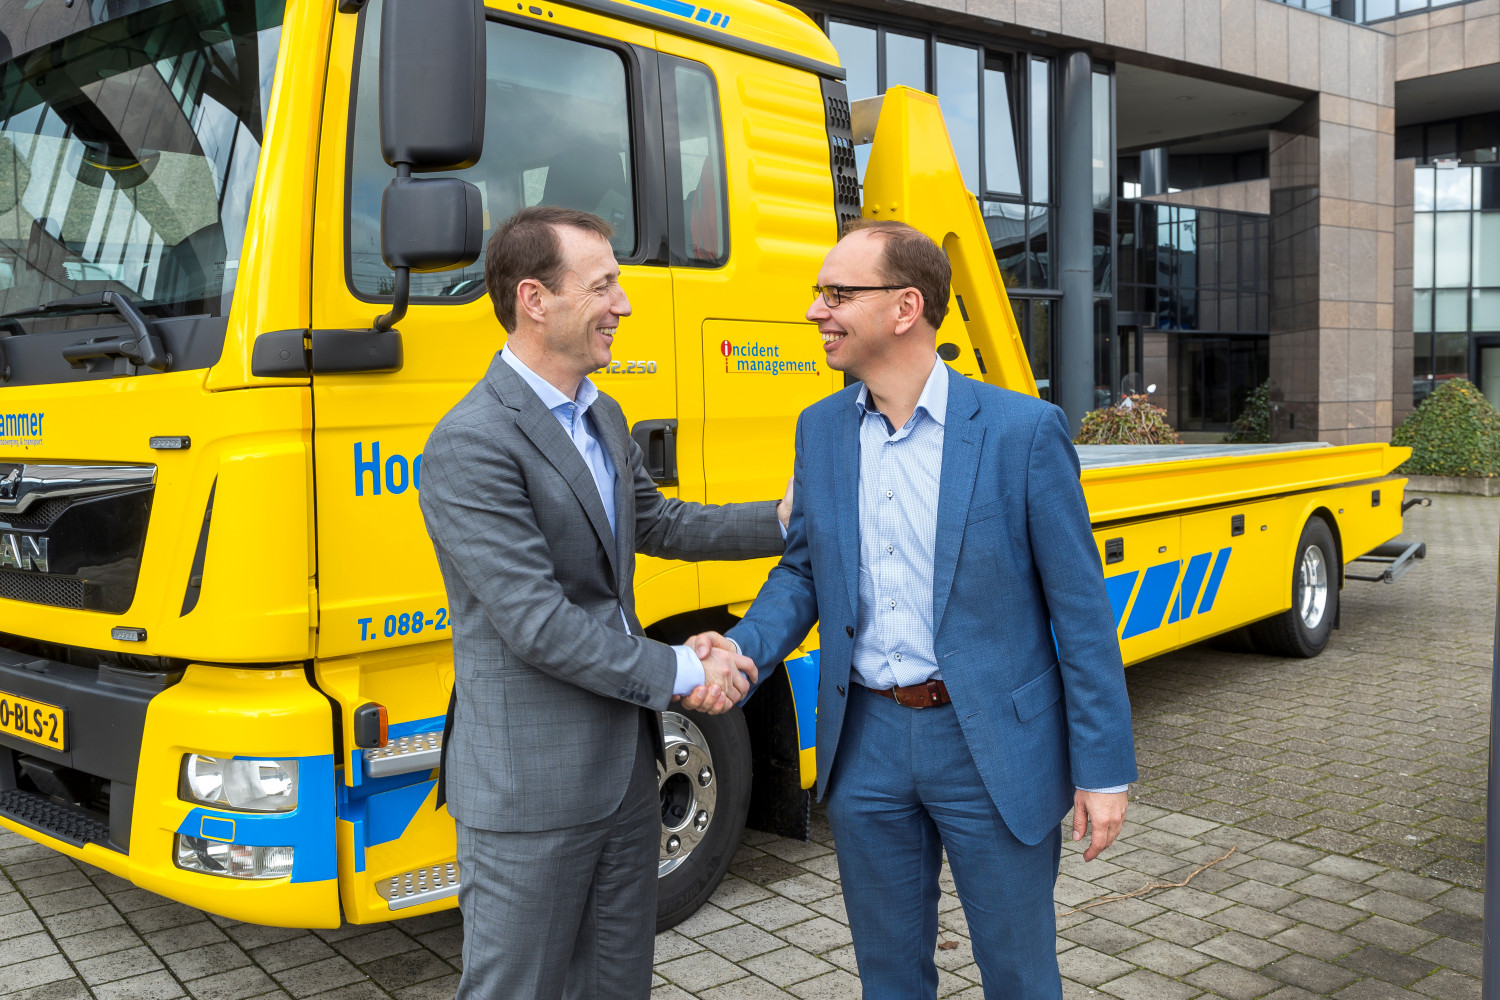 Ryan Florijn (R), chair of Stichting IMN, congratulates Hans Coffeng, managing director of CED, on the transfer of the LCM, in front of the offices of SOS International in Amsterdam-Zuidoost on 5 November 2019.